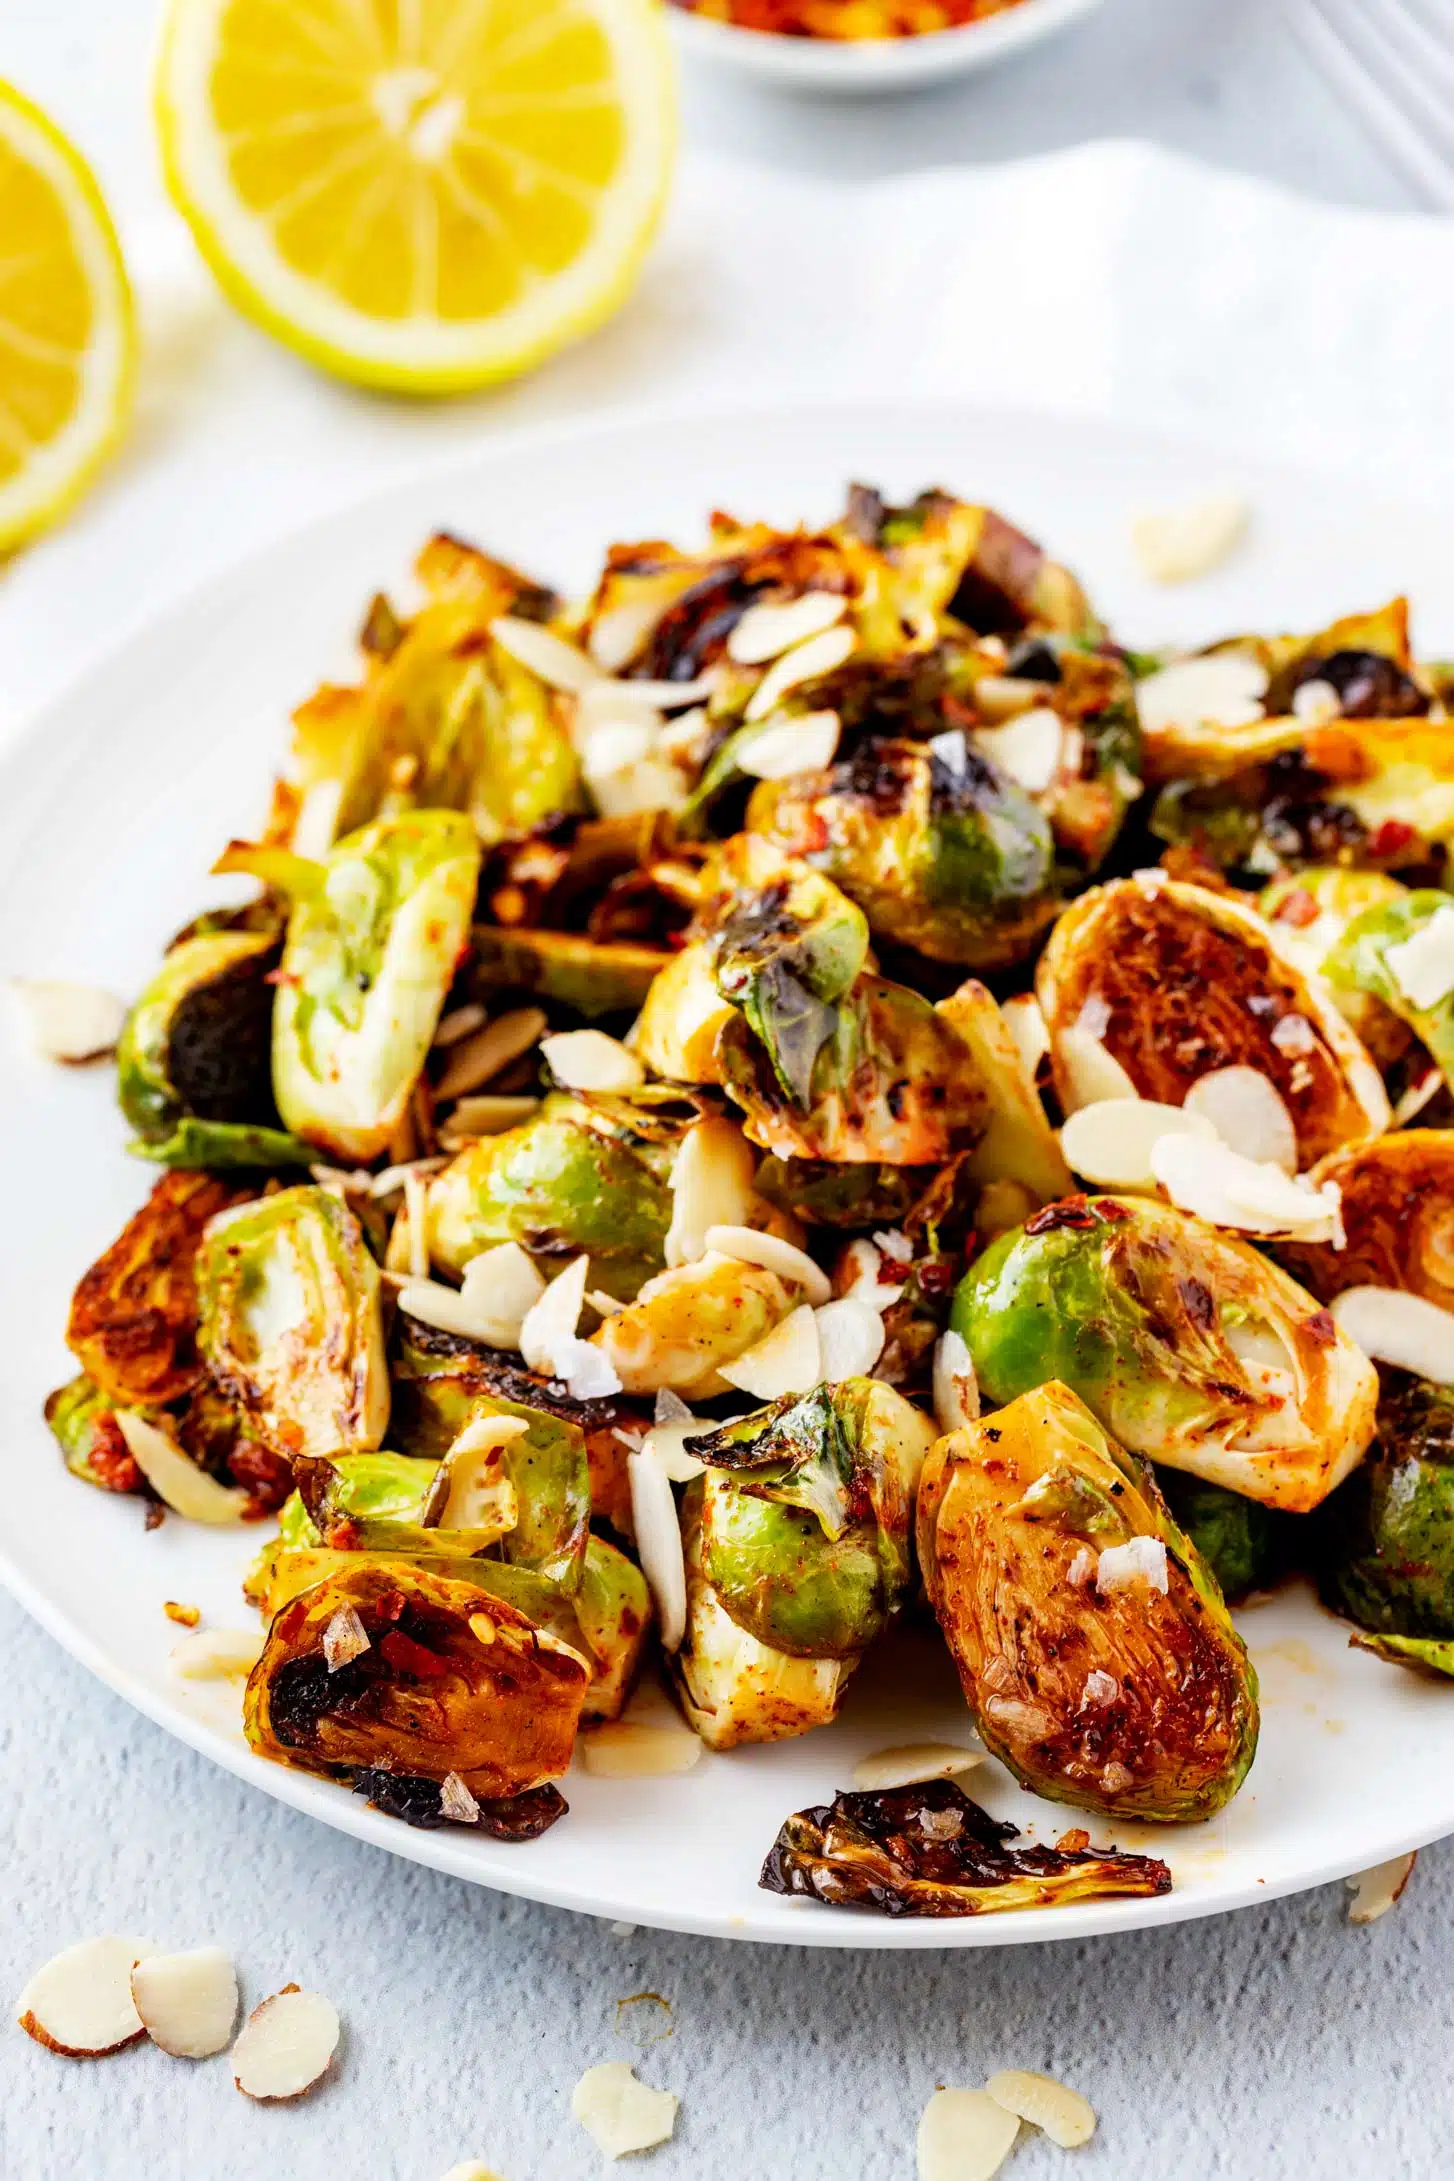 Halved Brussels sprouts on a plate.